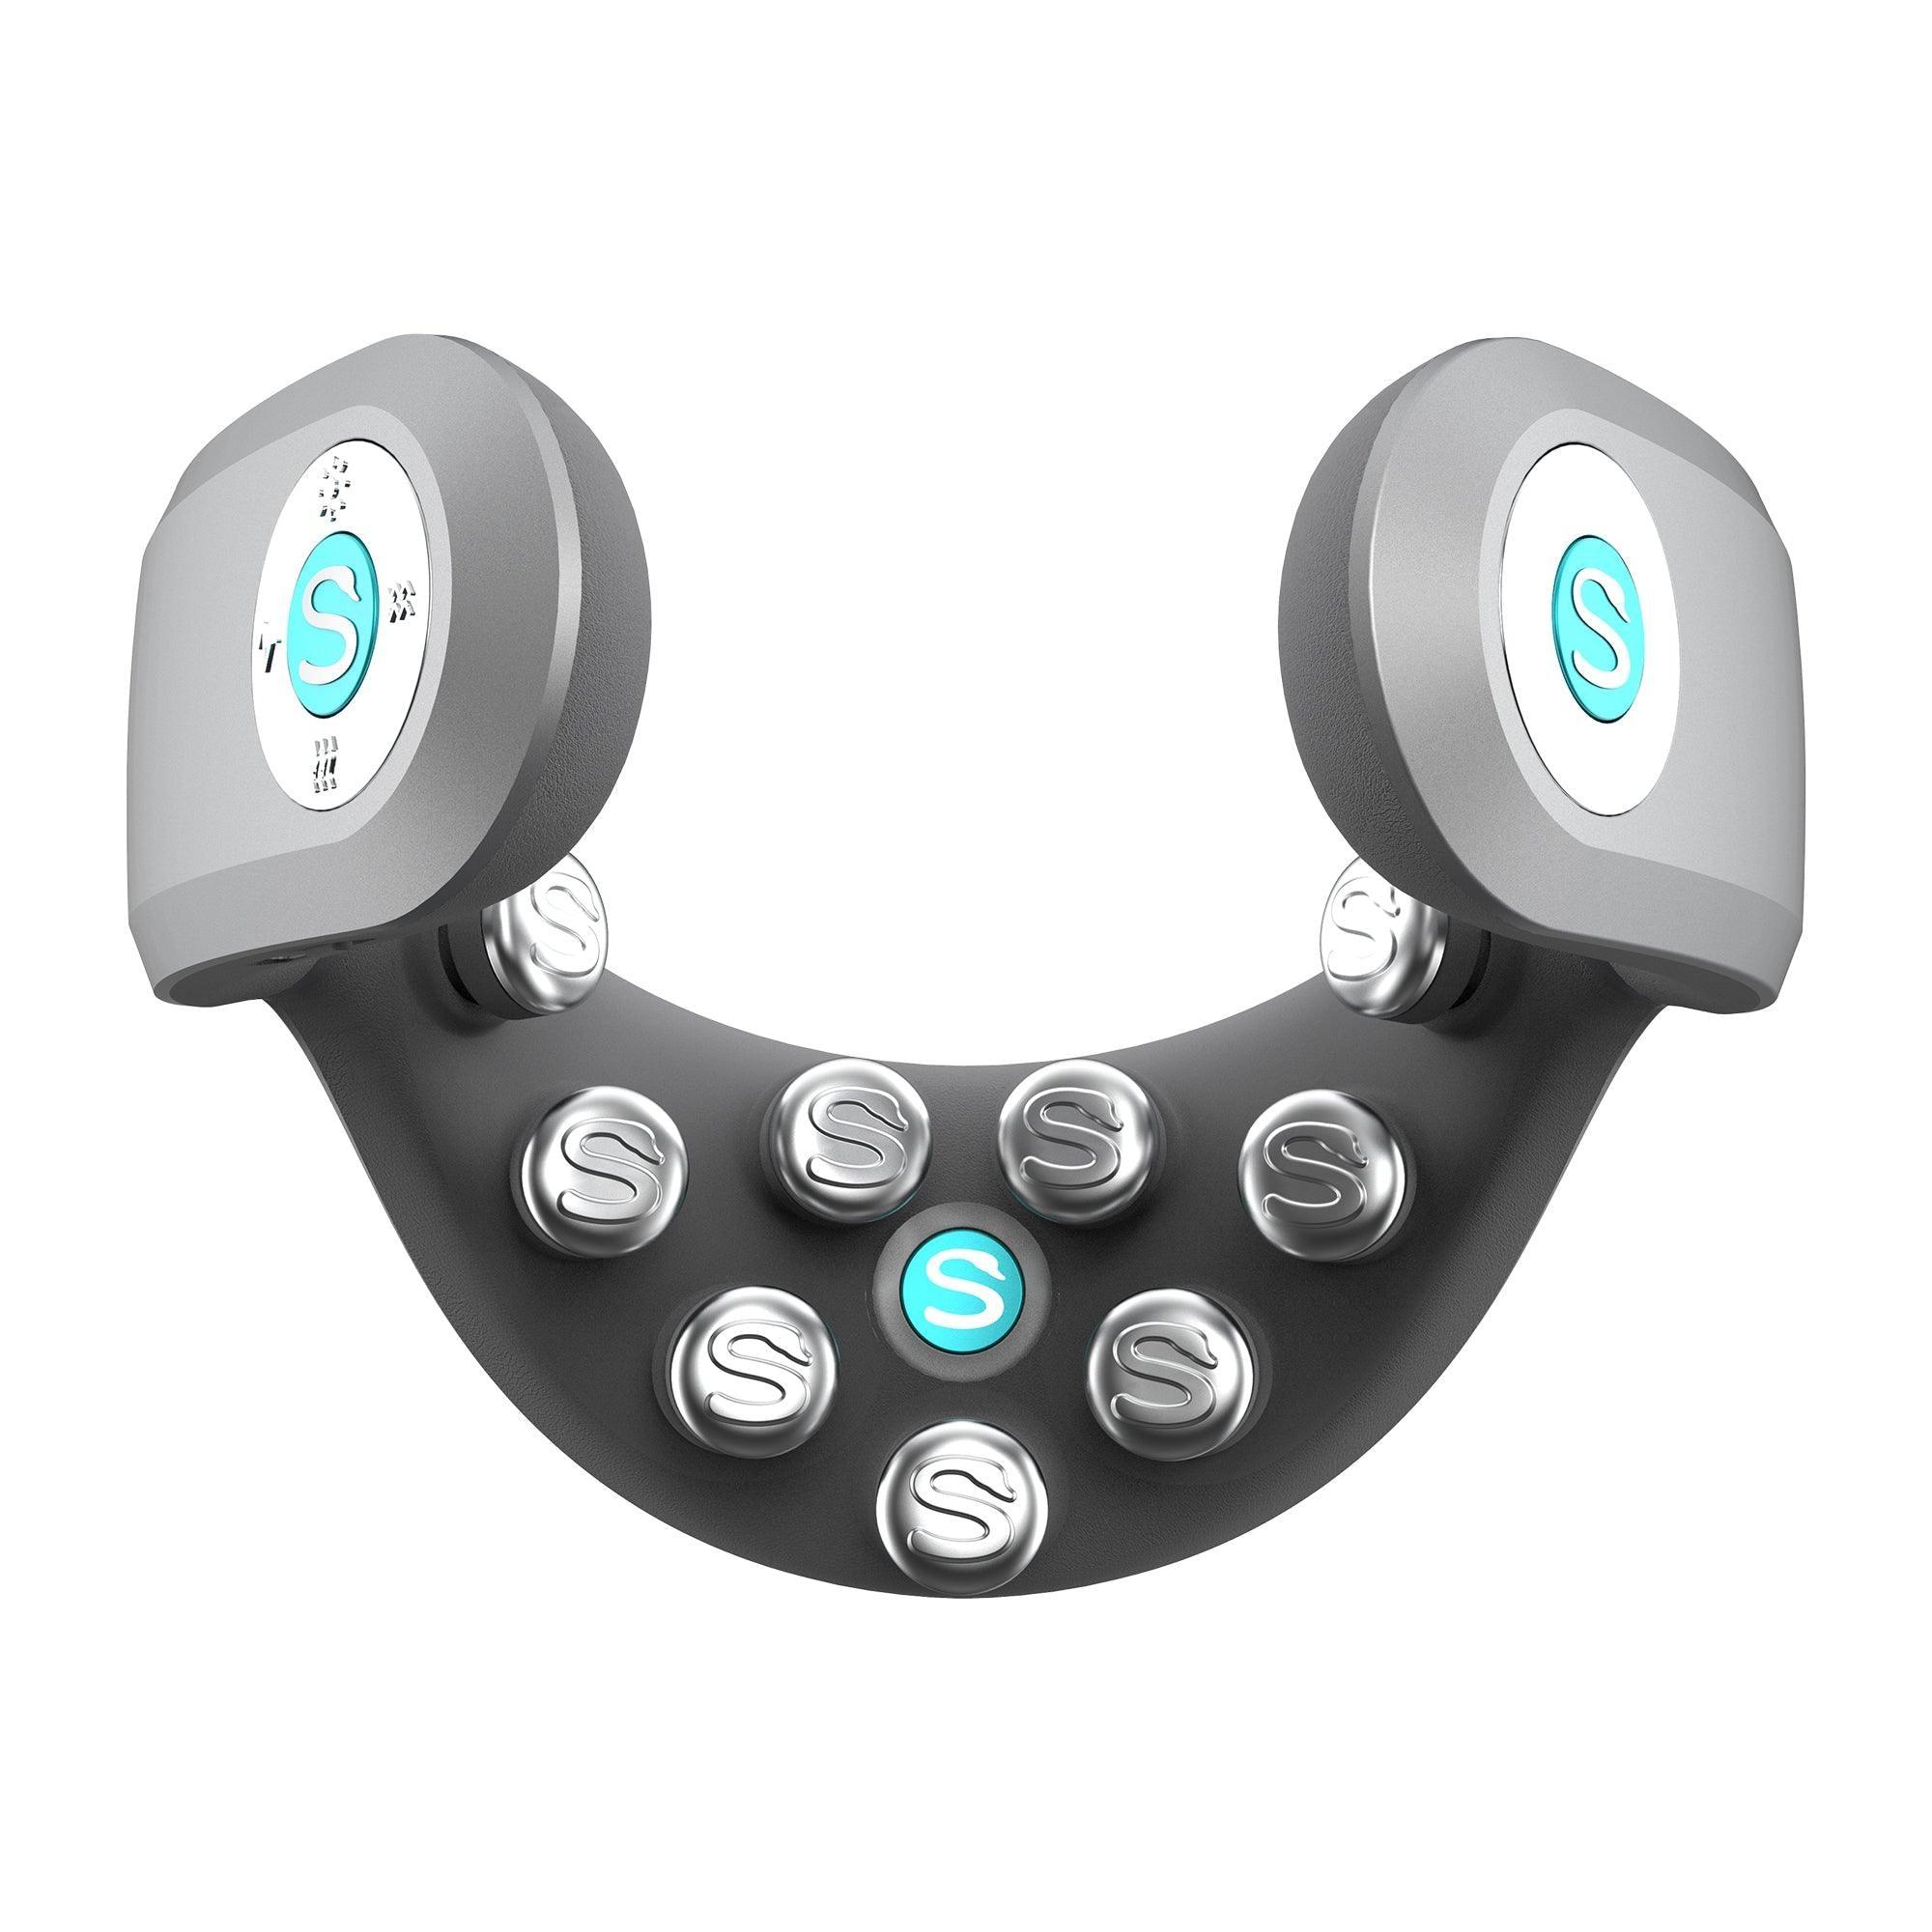 SKG Smart Neck Massager 4356 with Heat Function Voice Broadcast